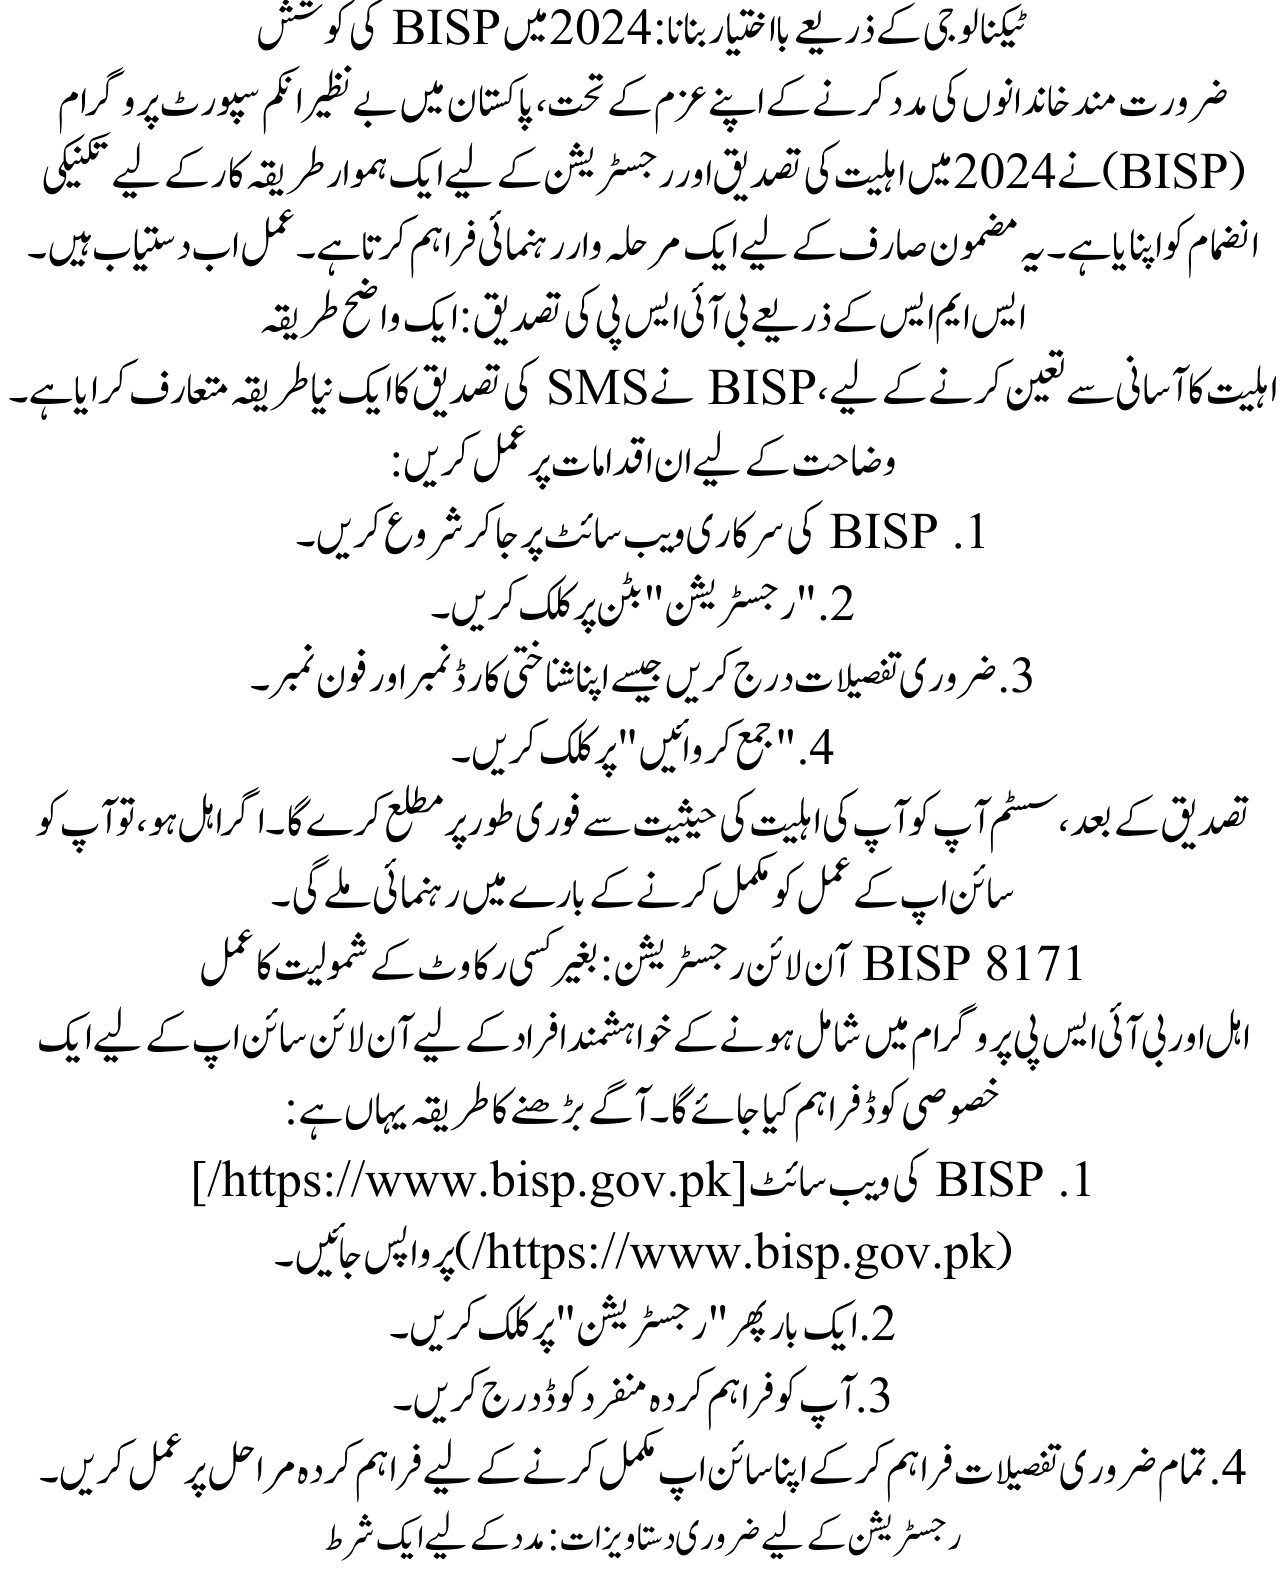 Empowering through Technology: BISP's Effort in 2024 In its commitment to supporting families in need, the Benazir Income Support Program (BISP) in Pakistan has embraced technological integration for a streamlined approach to eligibility verification and registration in 2024. This article provides a step-by-step guide on the user-friendly processes now available. BISP Verification via SMS: A Clarity-Driven Method